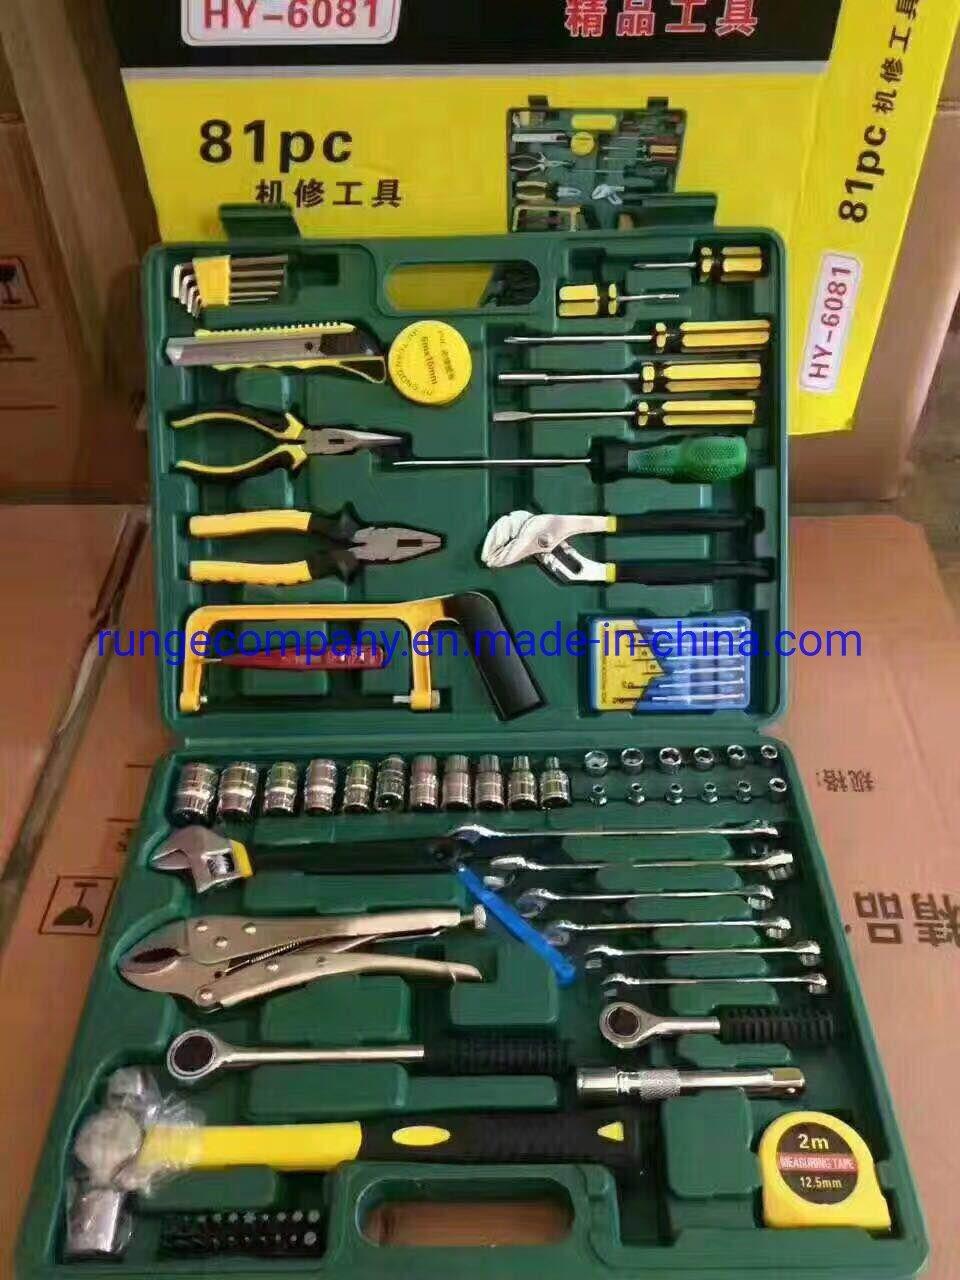 181piece Mechanics Tool Set Socket Wrench Auto Repair Tool Pliers Combination Mixed Hand Toolkit with Box Organizer Storage Case